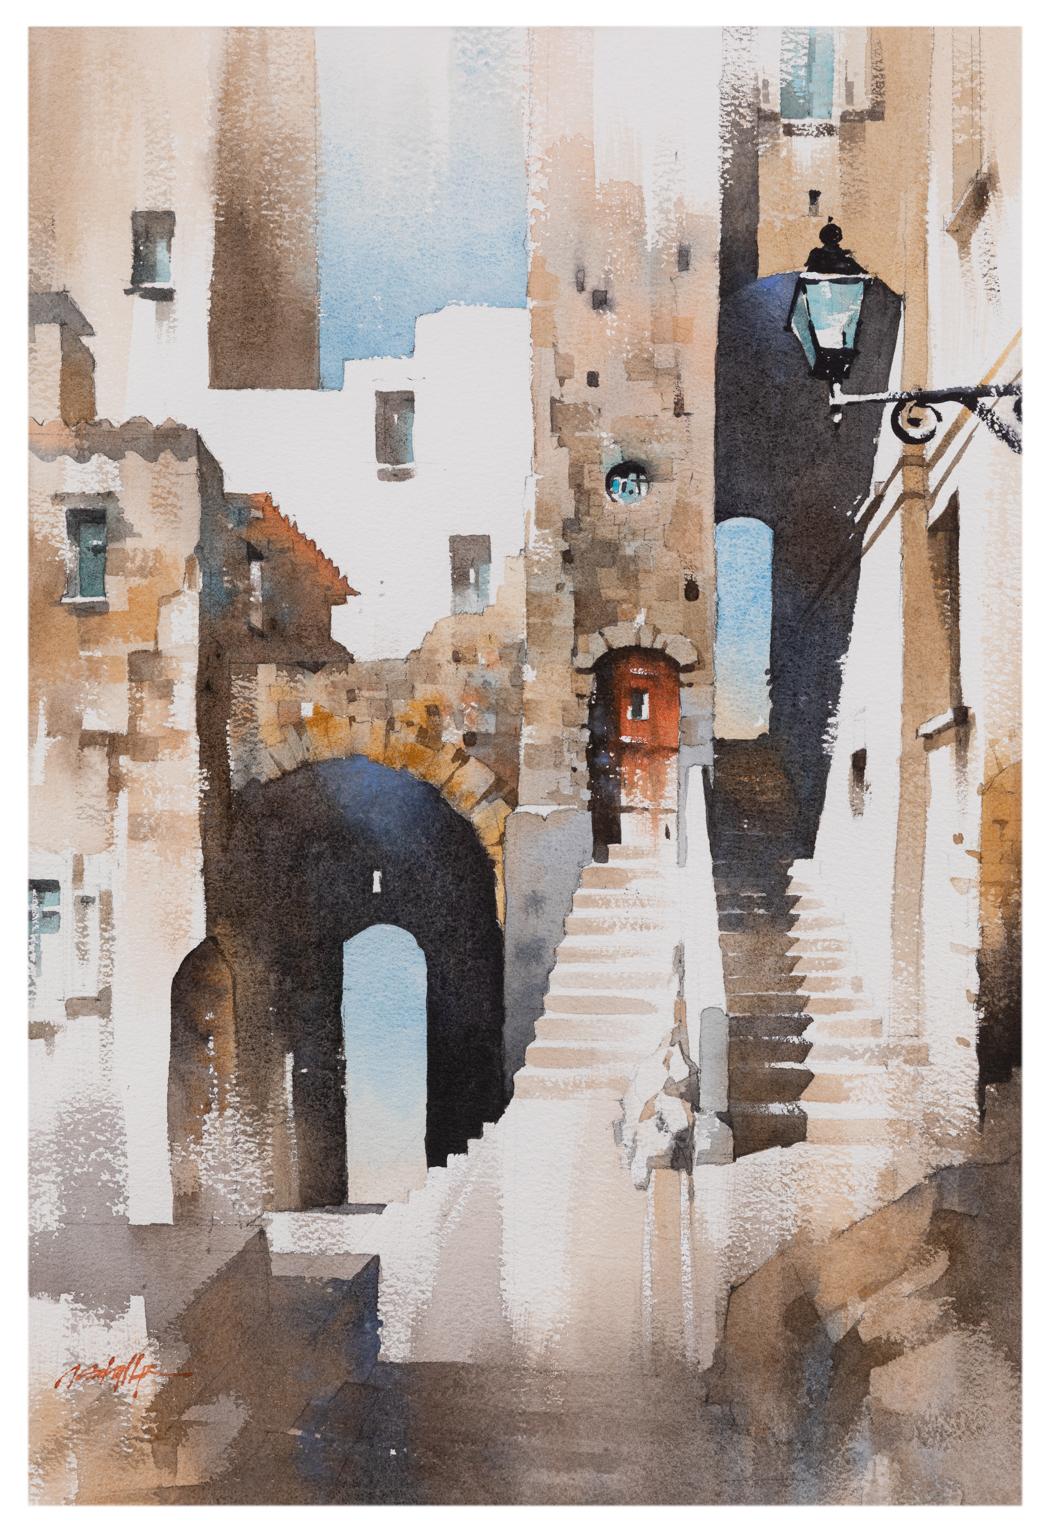 Thomas W. Schaller Landscape Art - Street Scene, Sperlonga Italy - Watercolor Architecture in Browns and Blues